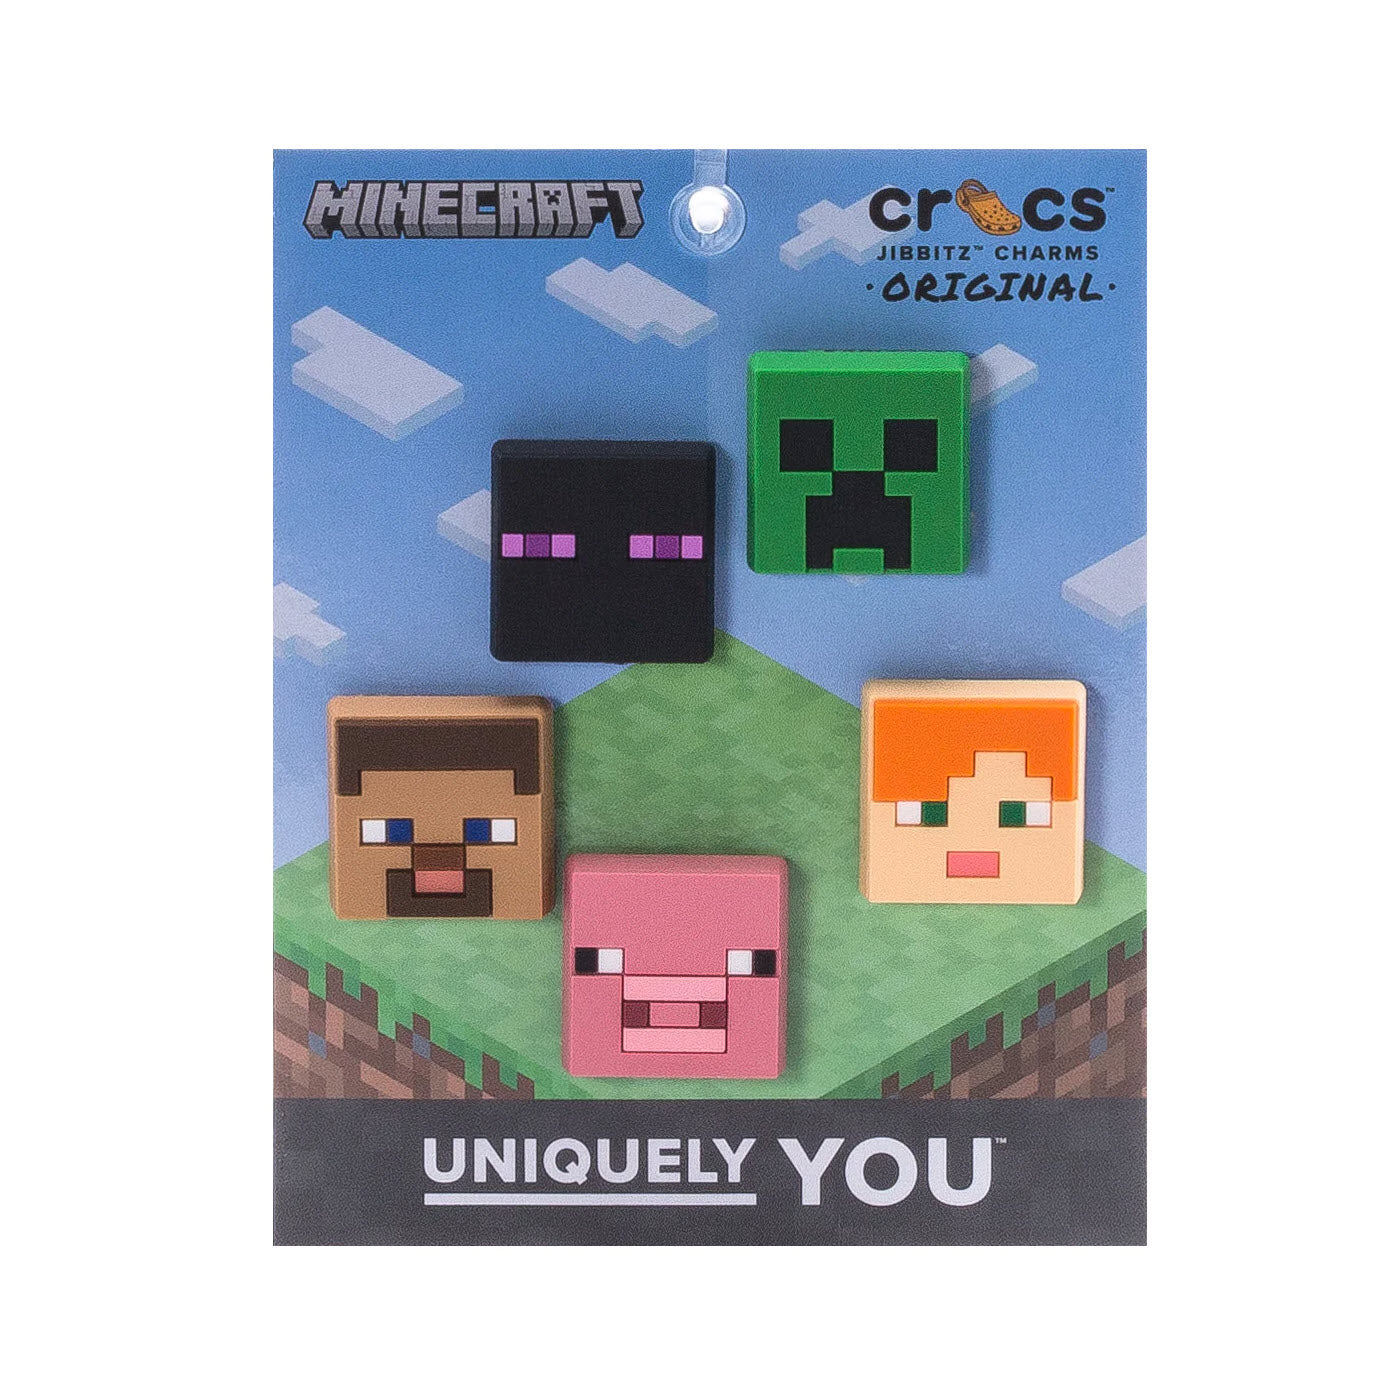 Minecraft-themed JIBBITZ MINECRAFT 5 PACK for Crocs, featuring pixelated designs of a pig, creeper, and other characters, displayed on a branded card.